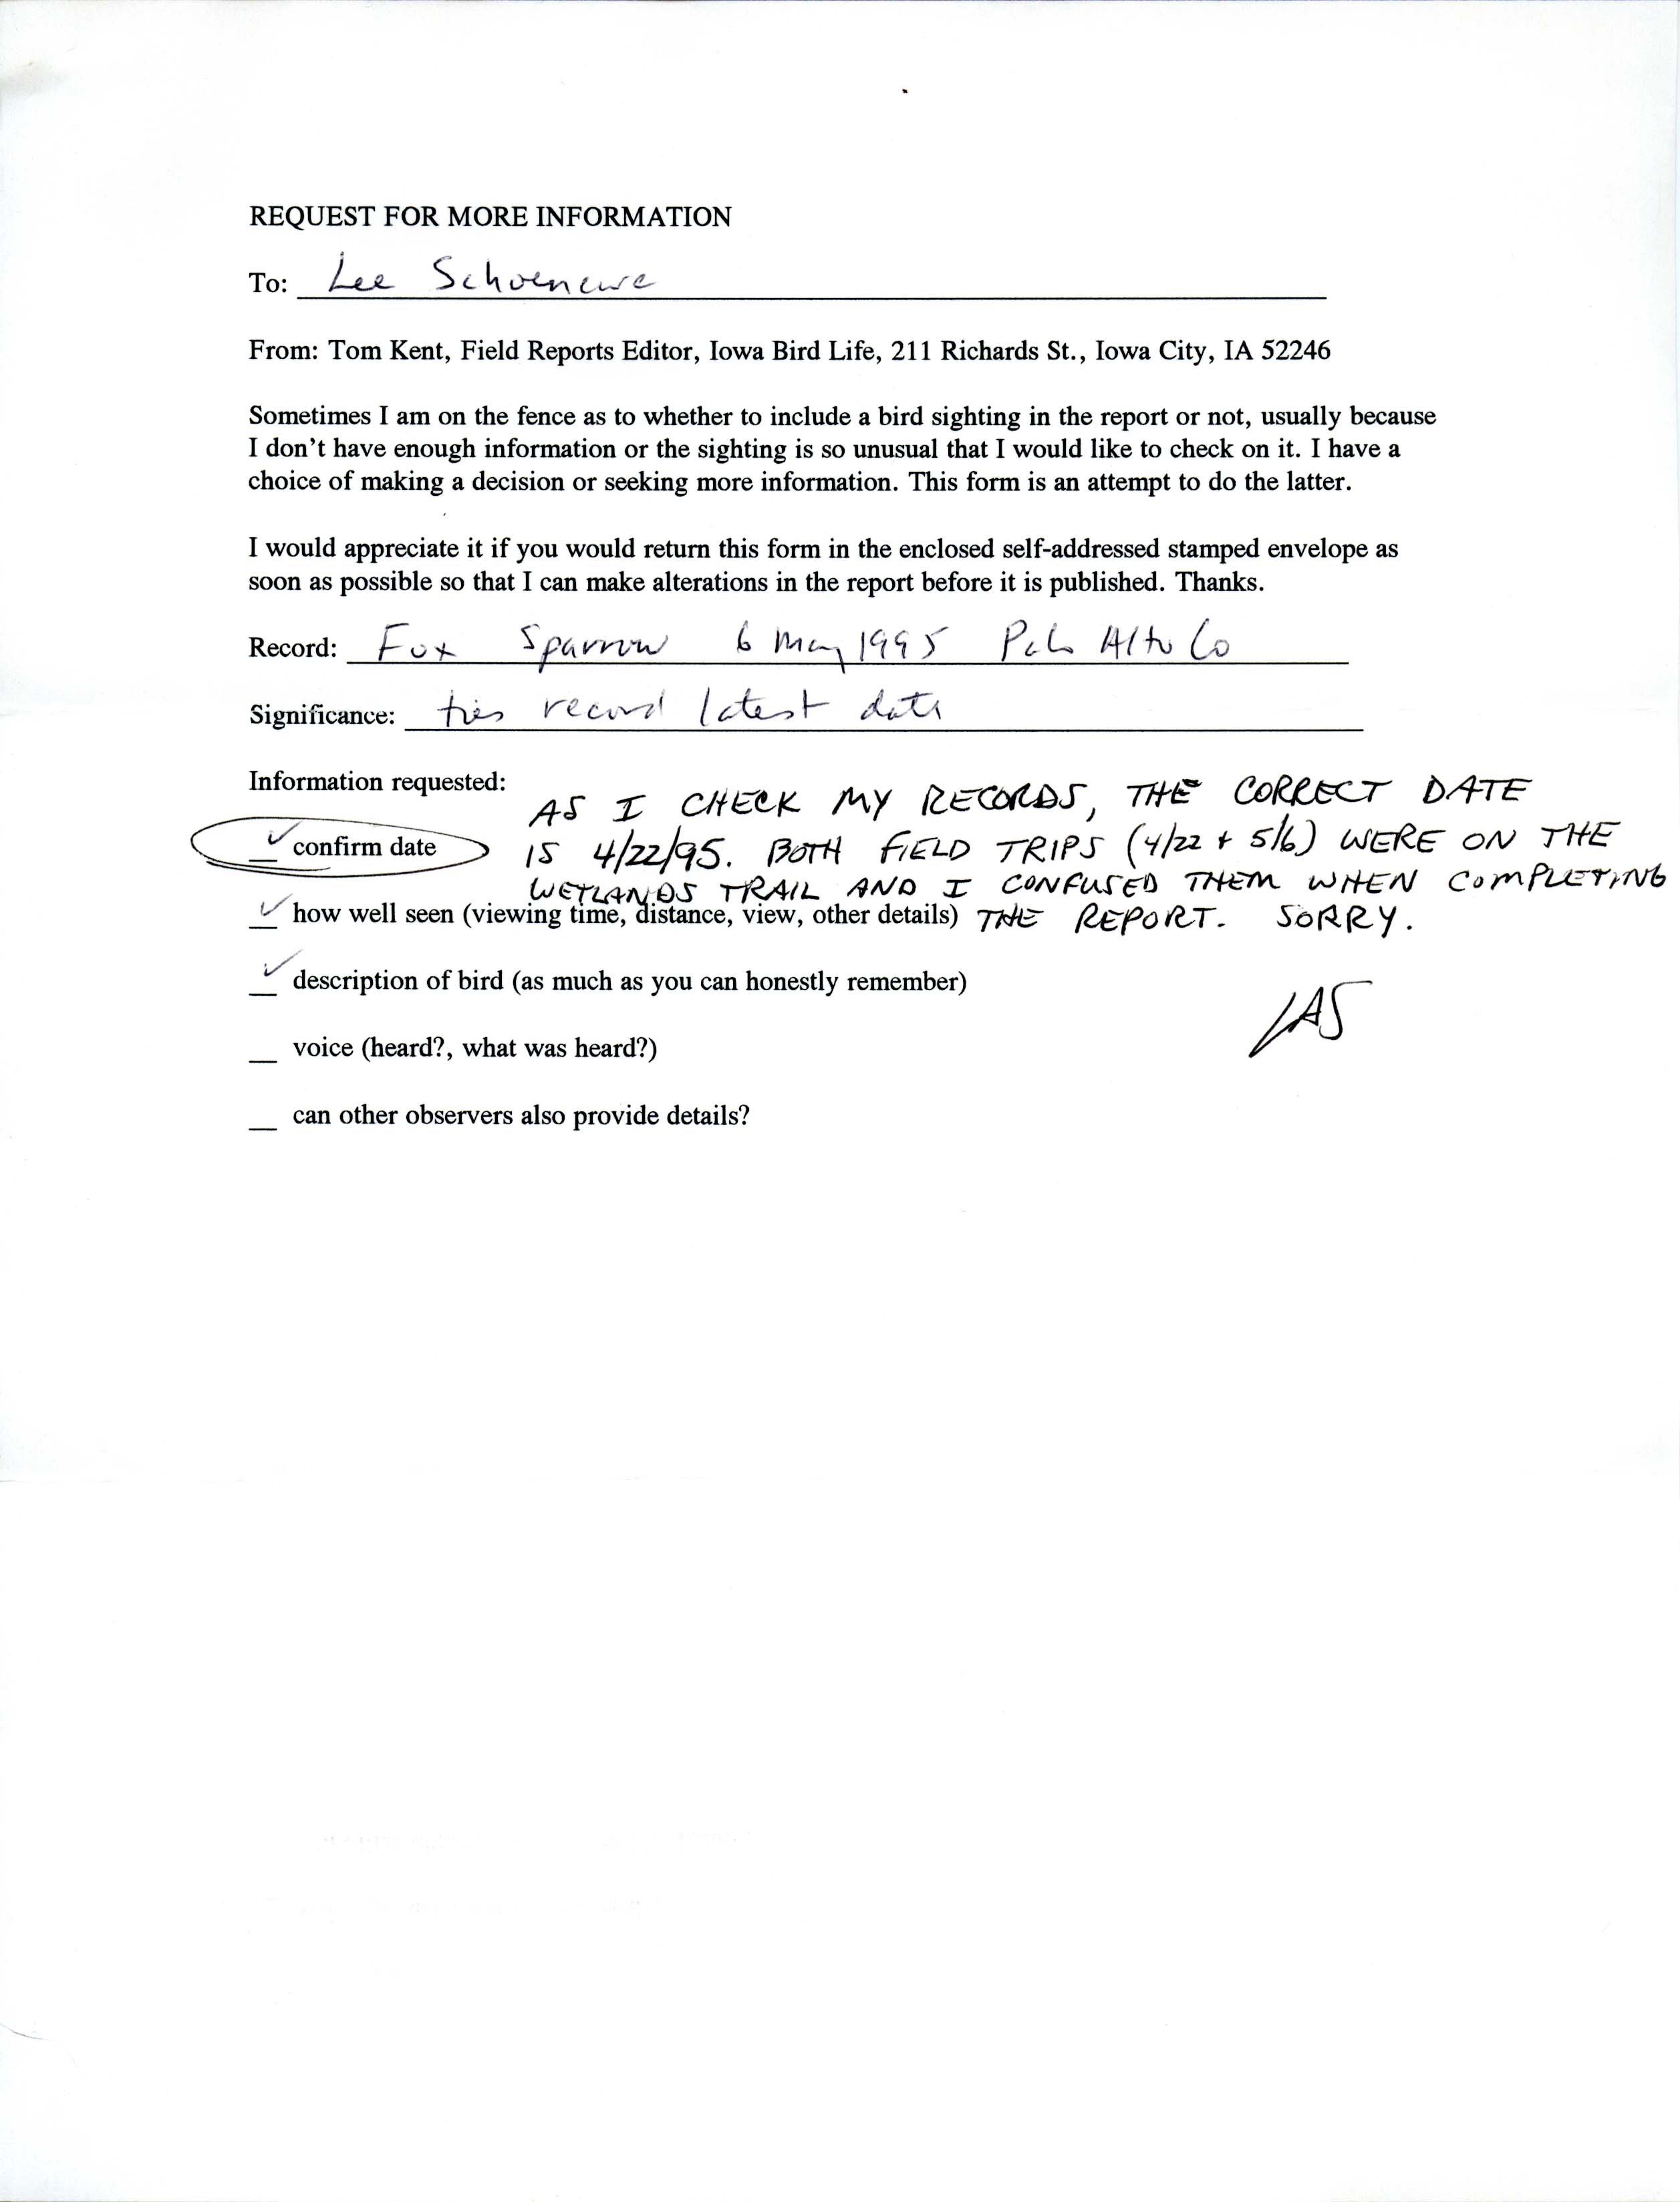 Thomas Kent letter to Lee Schoenewe regarding request for more information for a Fox Sparrow sighting, spring 1995